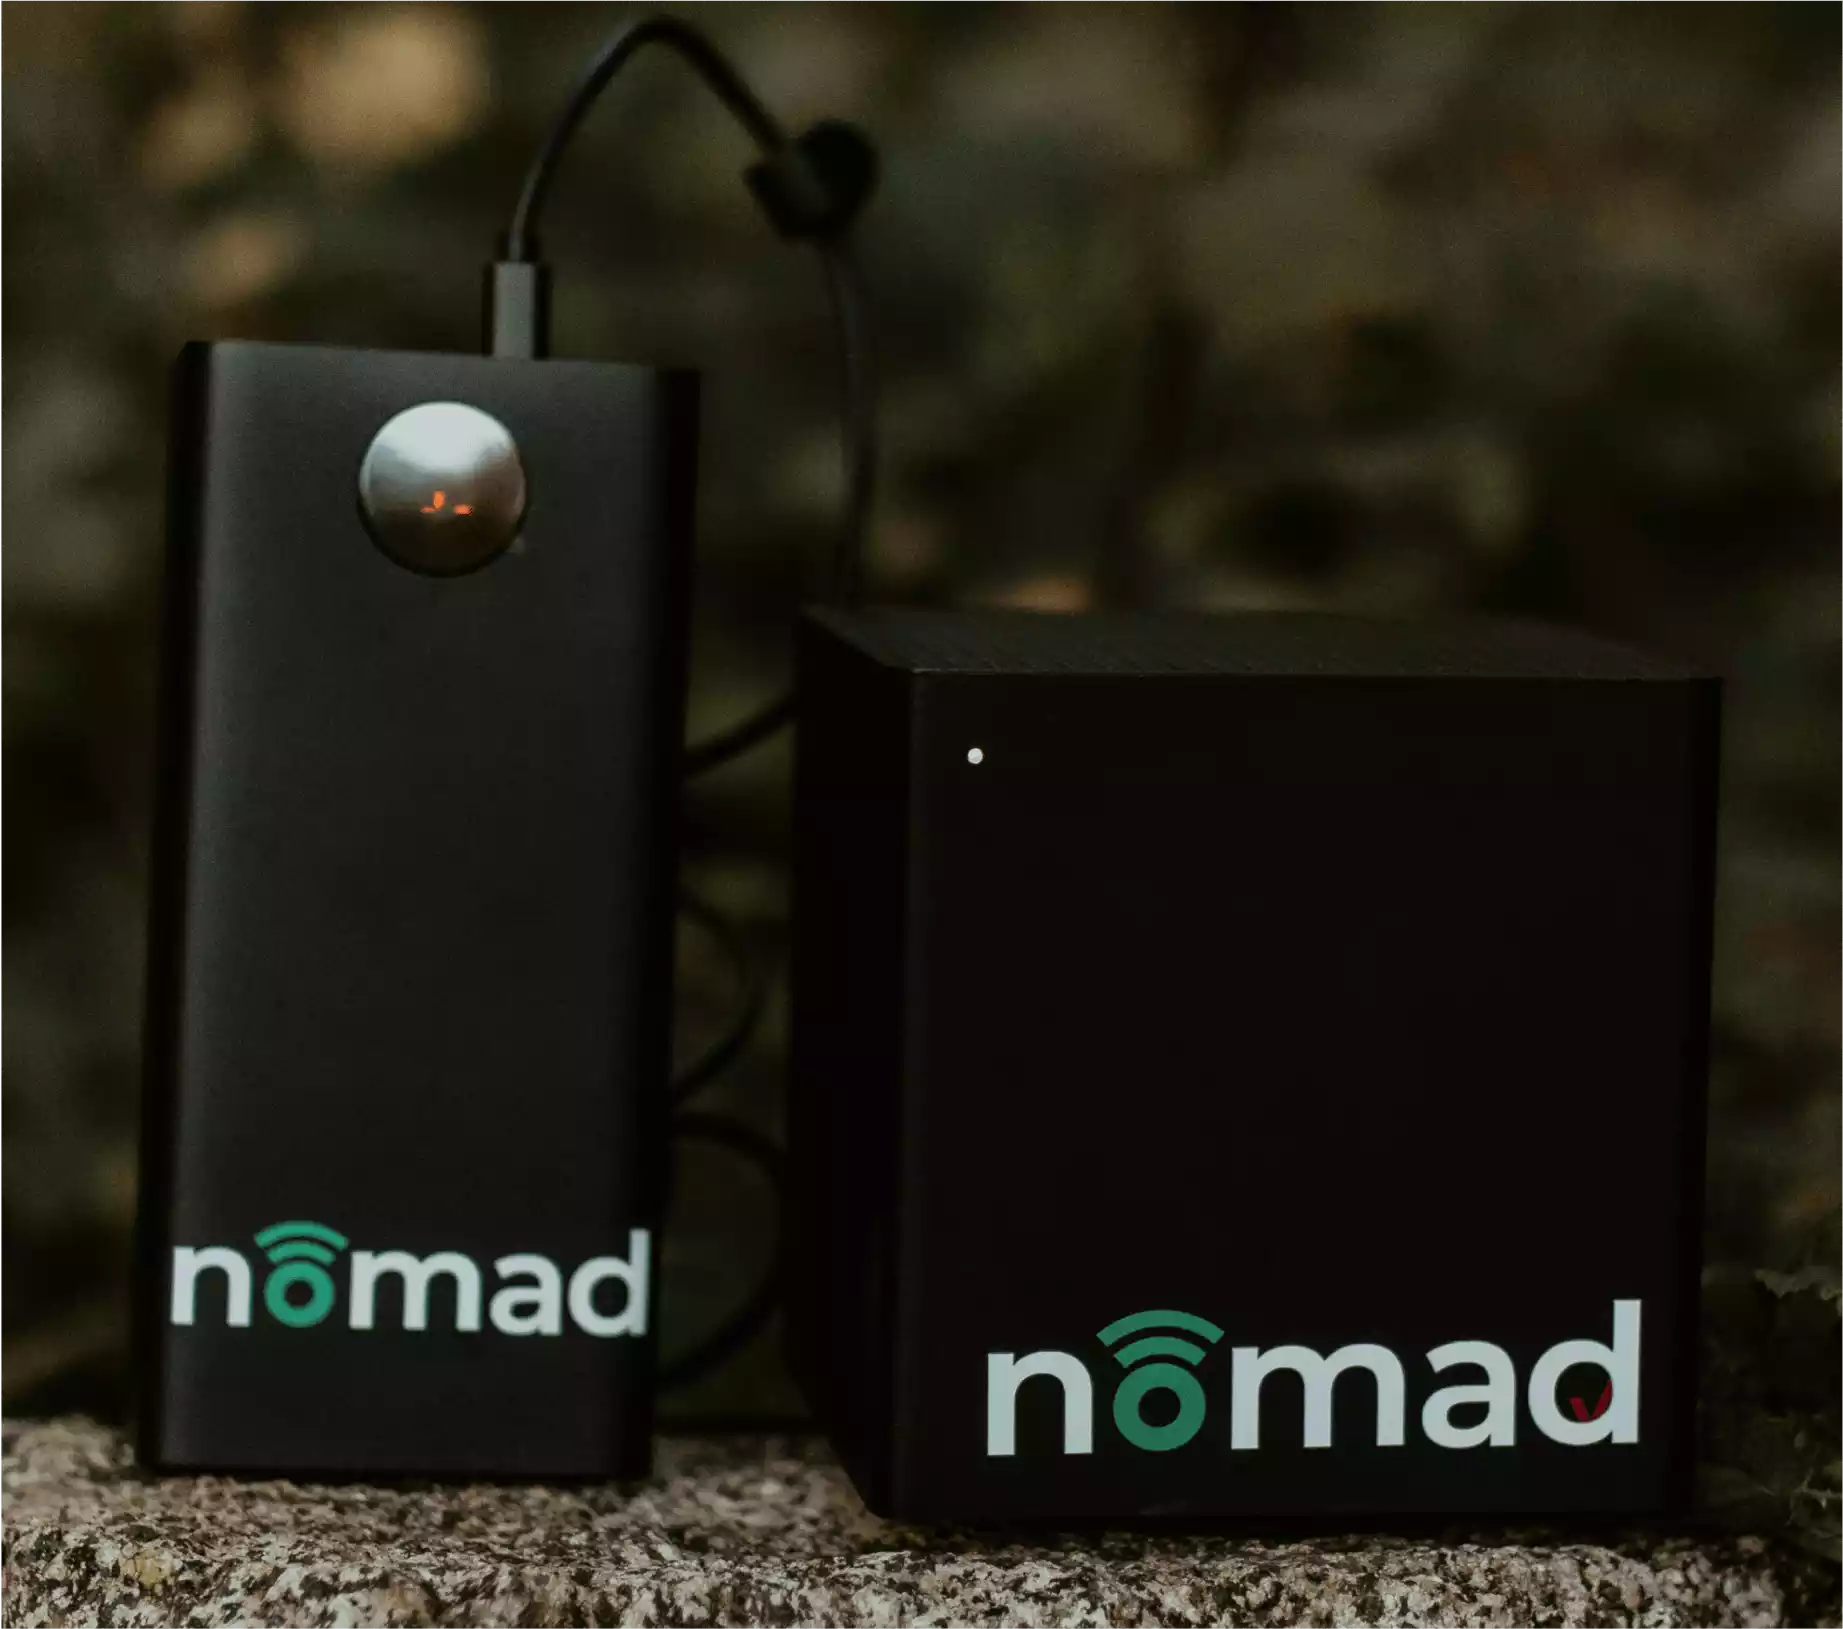 Meet the Nomad Omega - Turbocharged Internet that Powers Rural Househo –  Nomad Internet